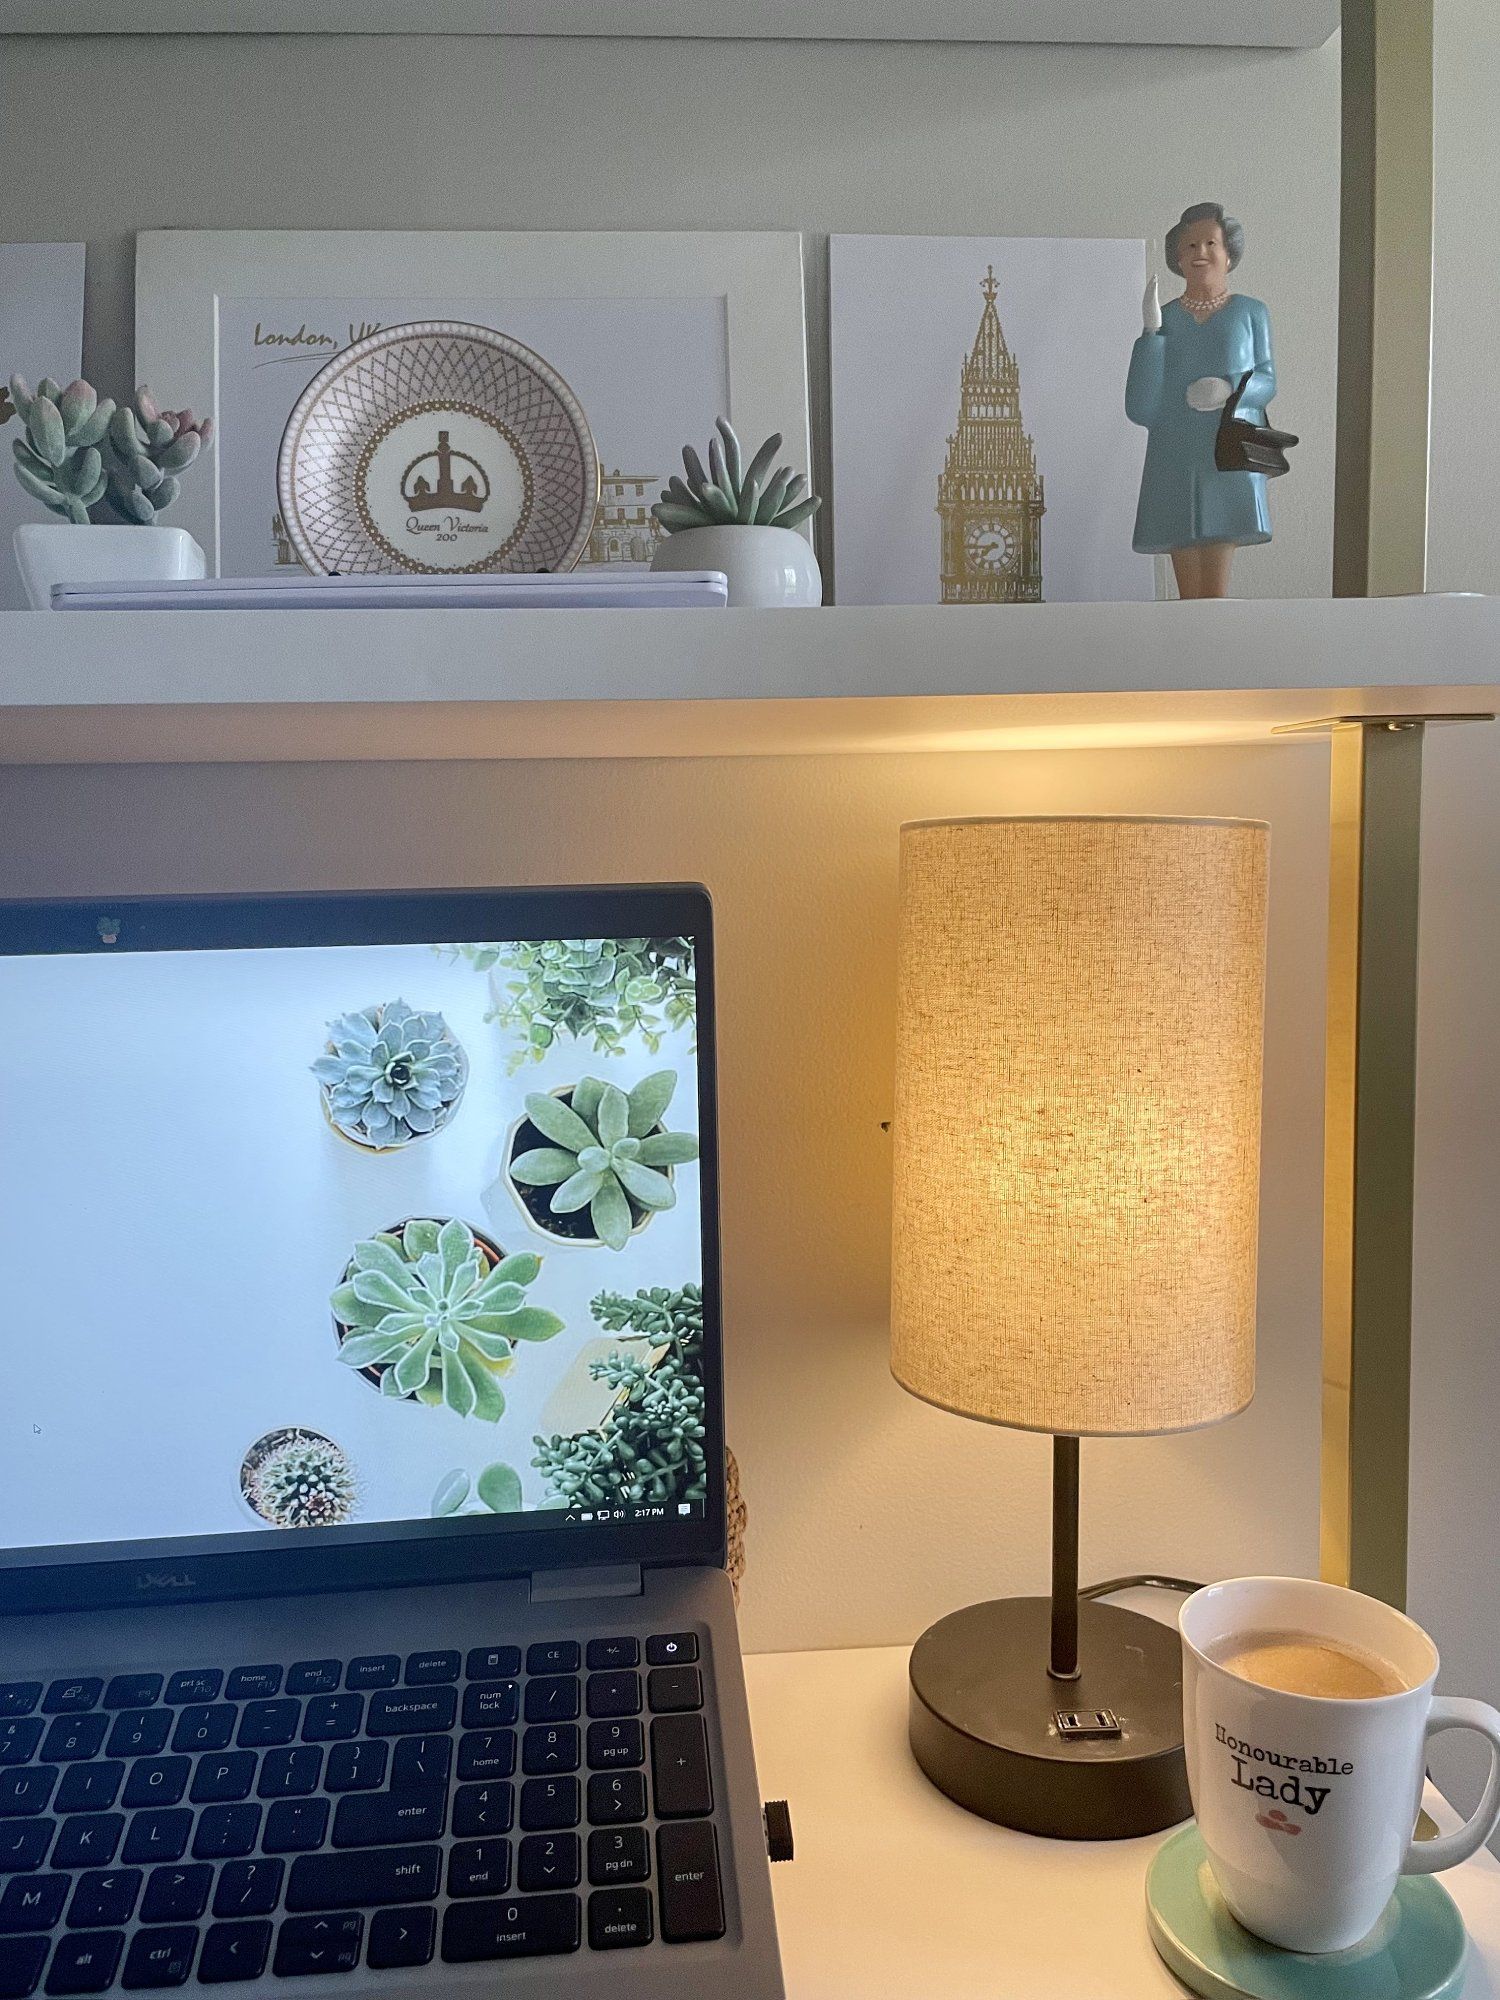 A desk setup featuring the Dell laptop, lamp, Honourable Lady mug, and some British souvenirs on the shelves